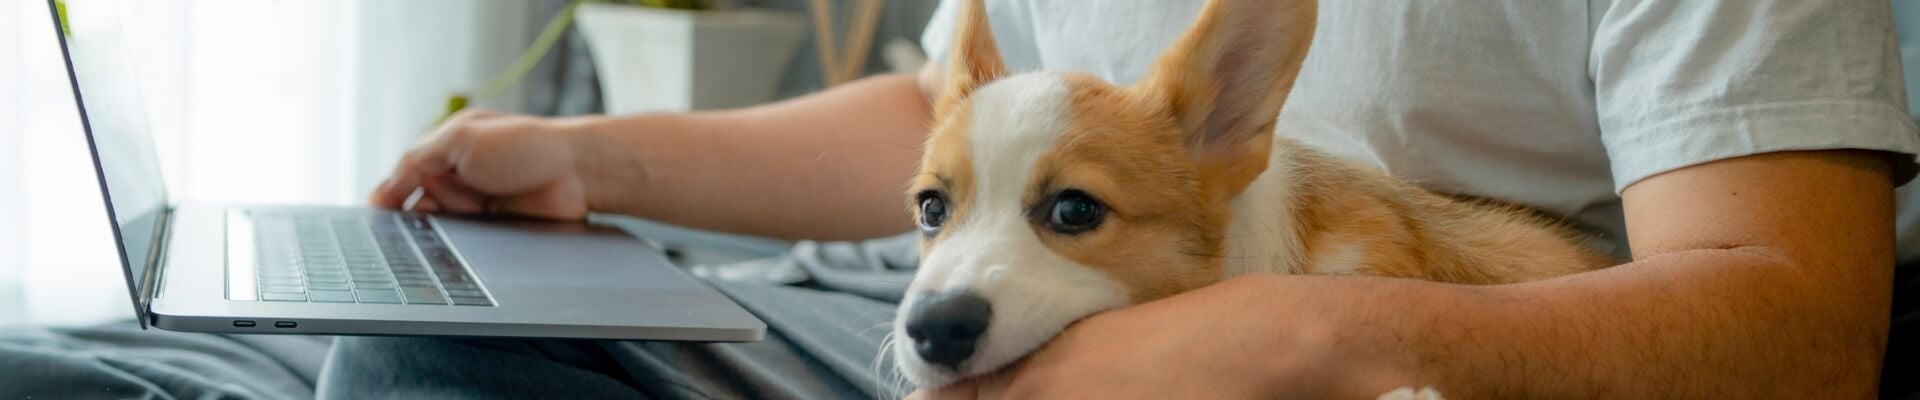 A corgi puppy laying on their owner's lap